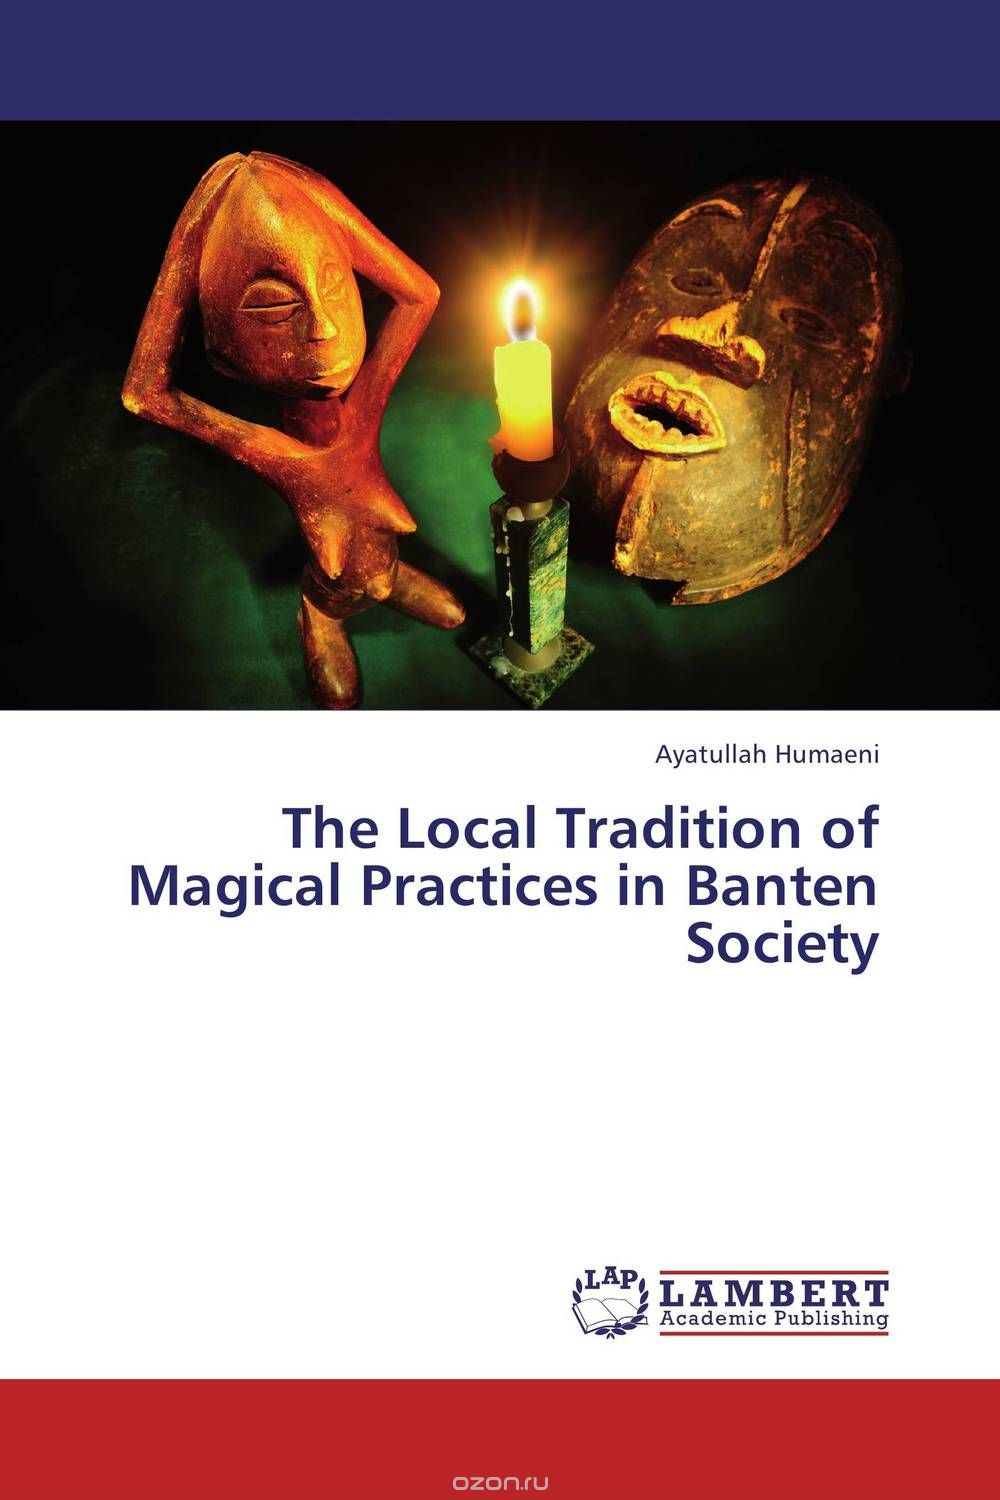 The Local Tradition of Magical Practices in Banten Society